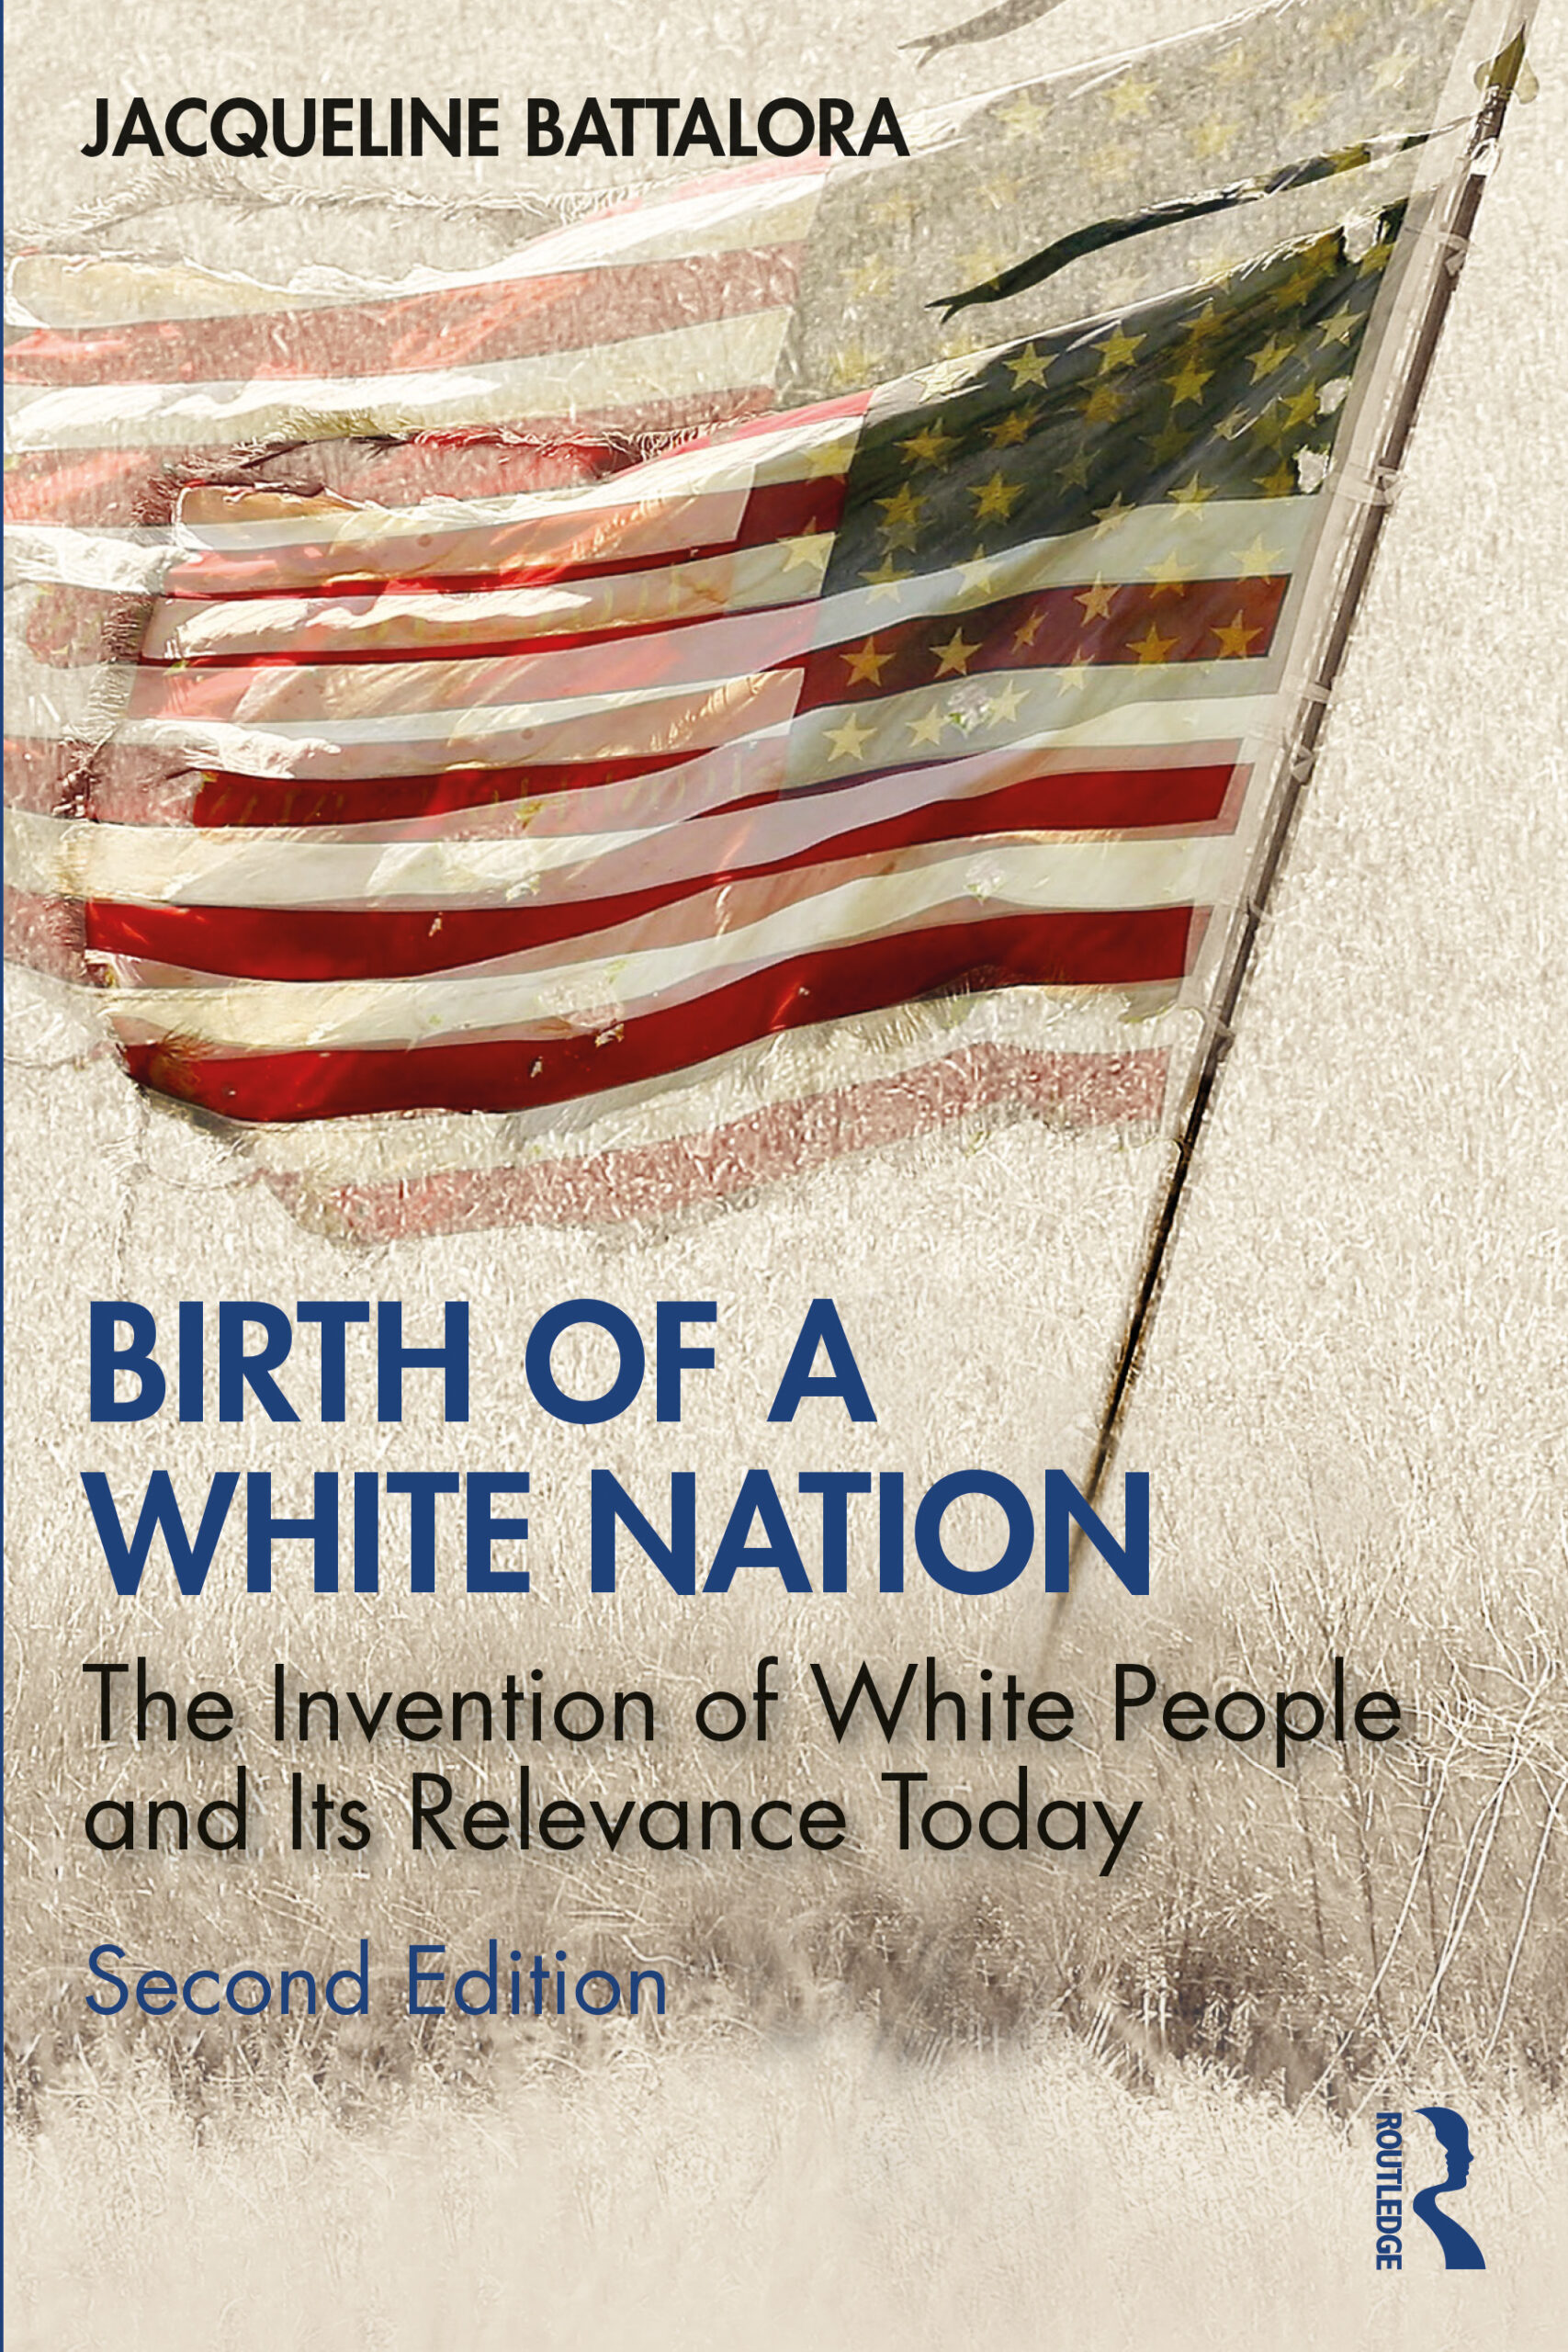 Book cover with a tattered USA flag reading Jacqueline Battalora, Birth of a White Nation: The Invention of White People and Its Relevance Today Second Edition